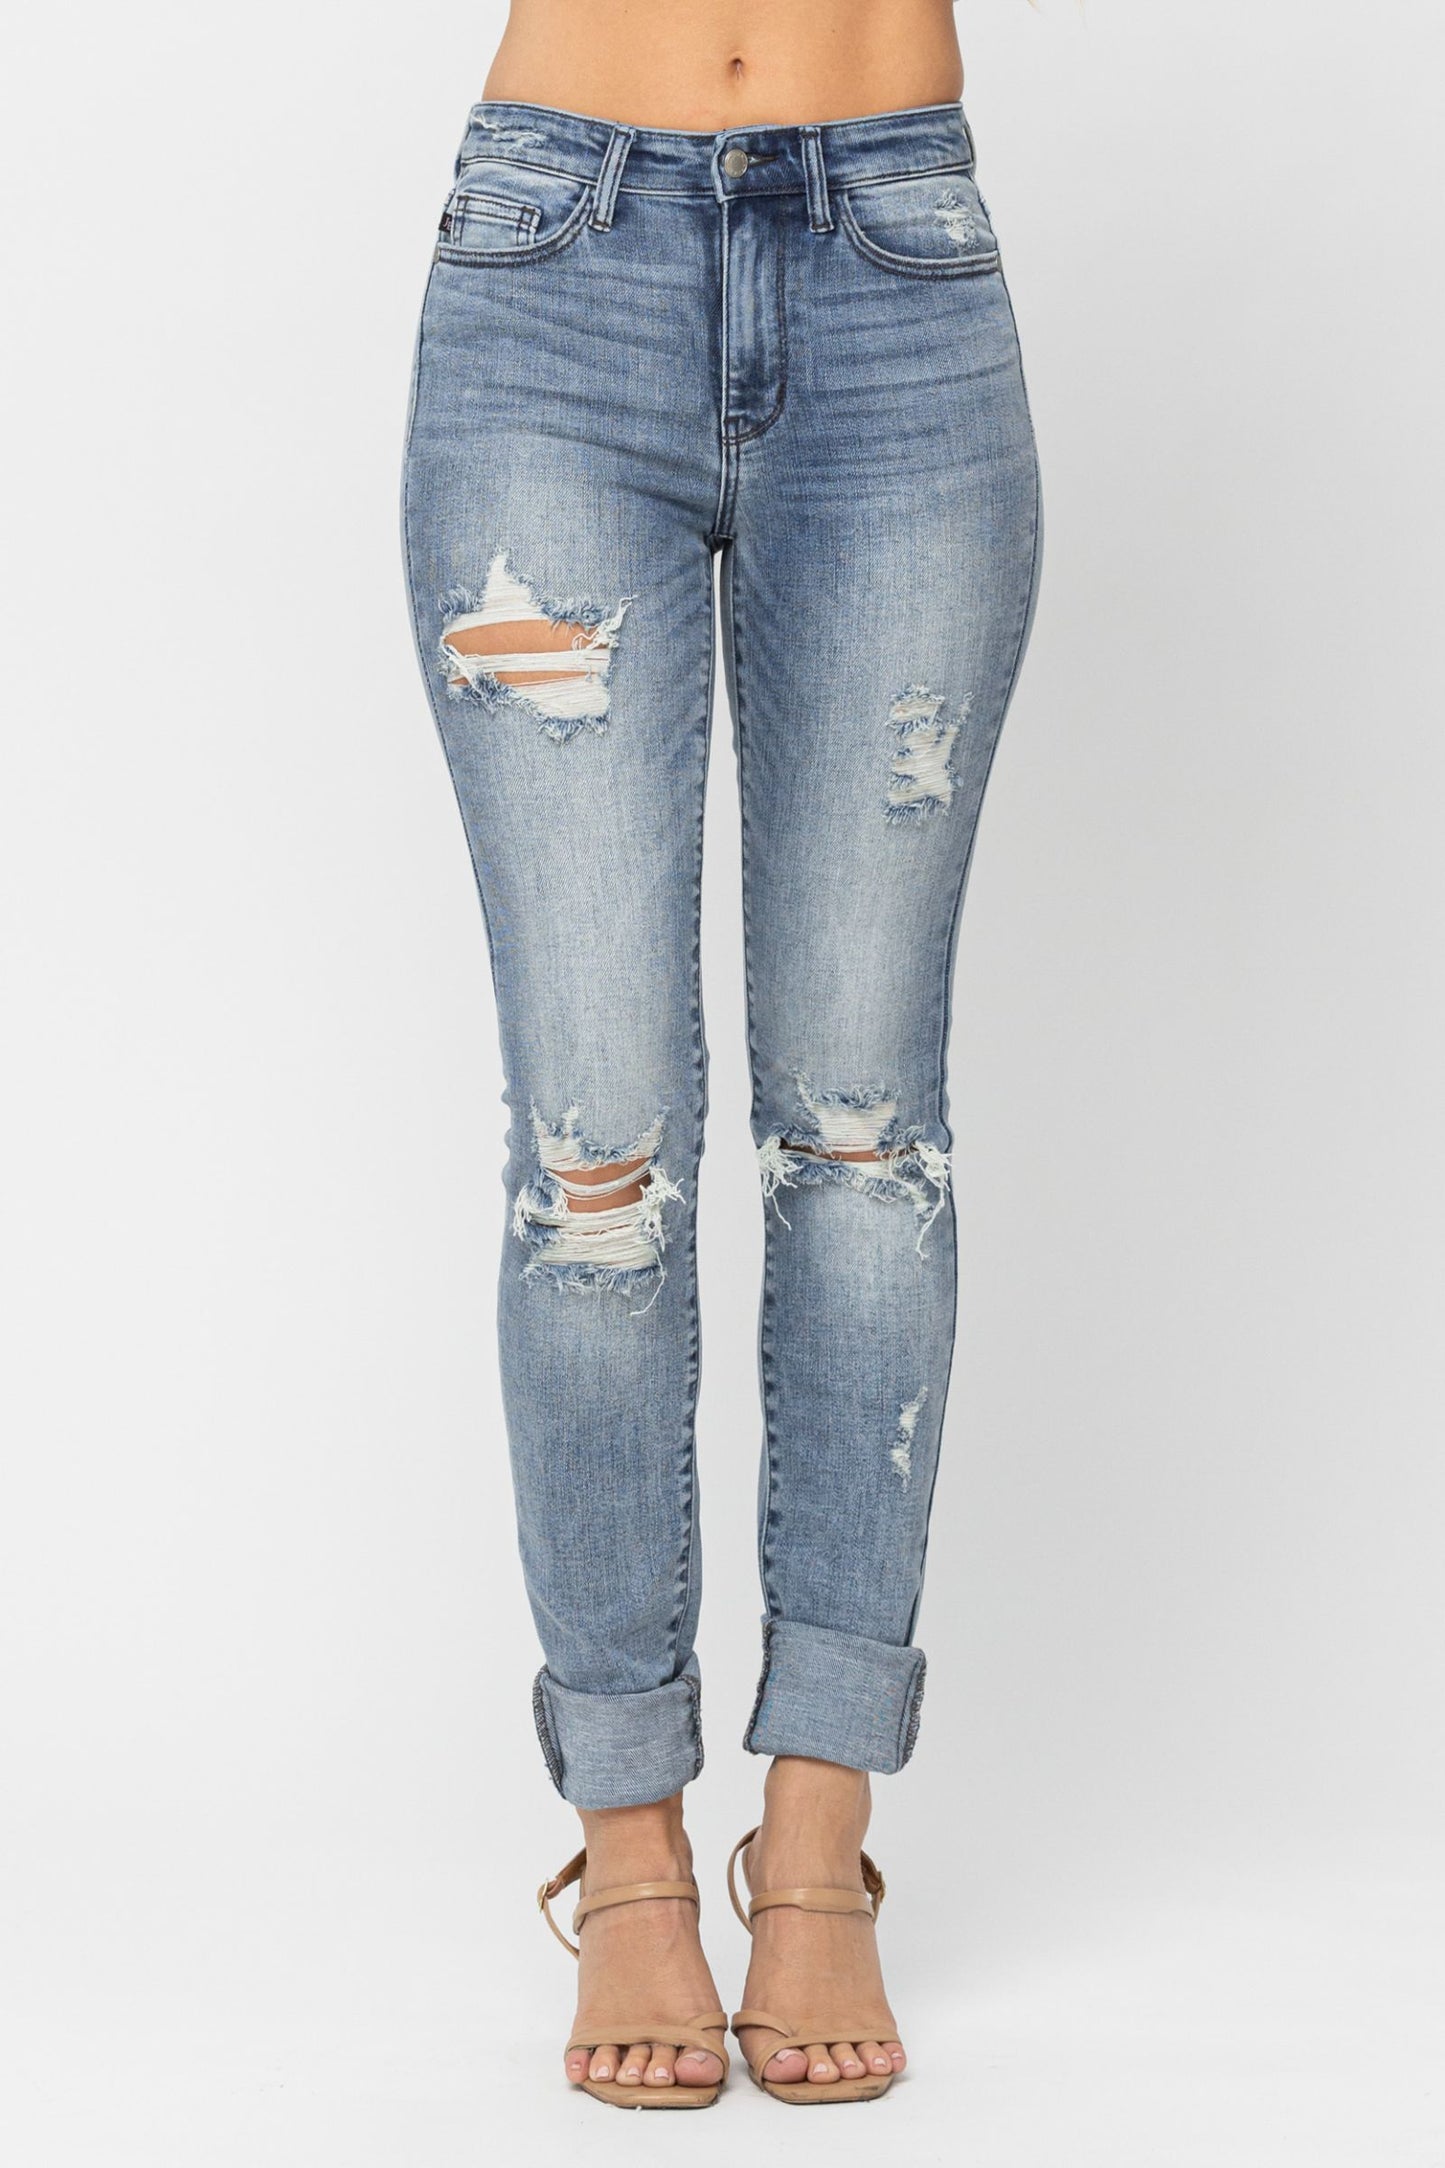 JUDY BLUE: DISTRESSED JEANS